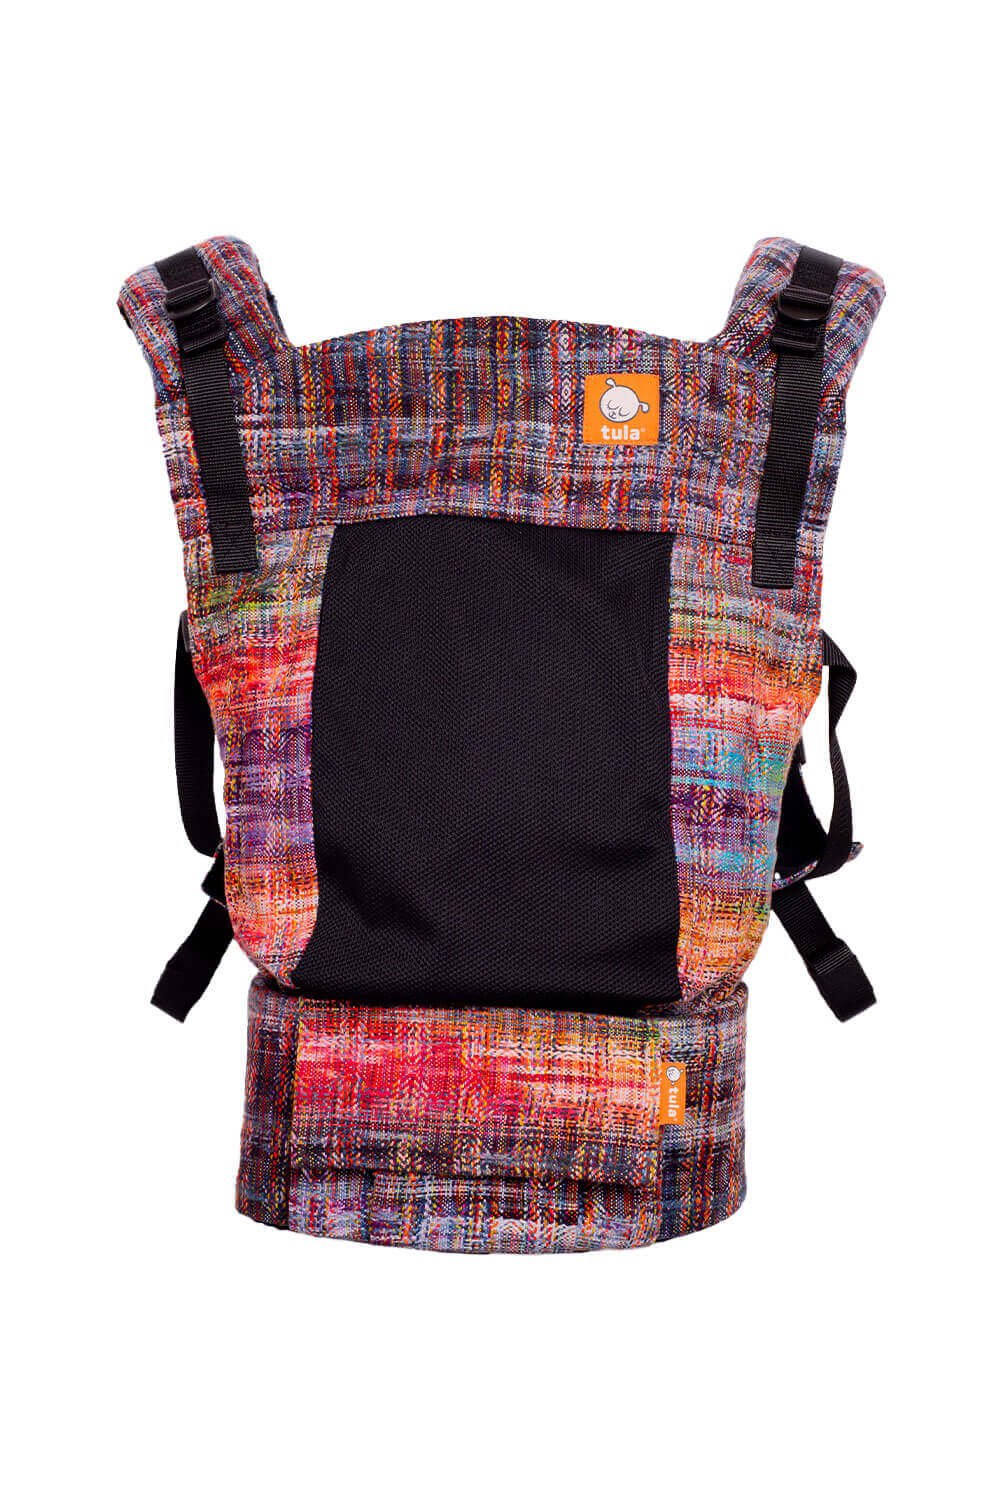 Coast The Prism - Signature Handwoven Free-to-Grow Baby Carrier